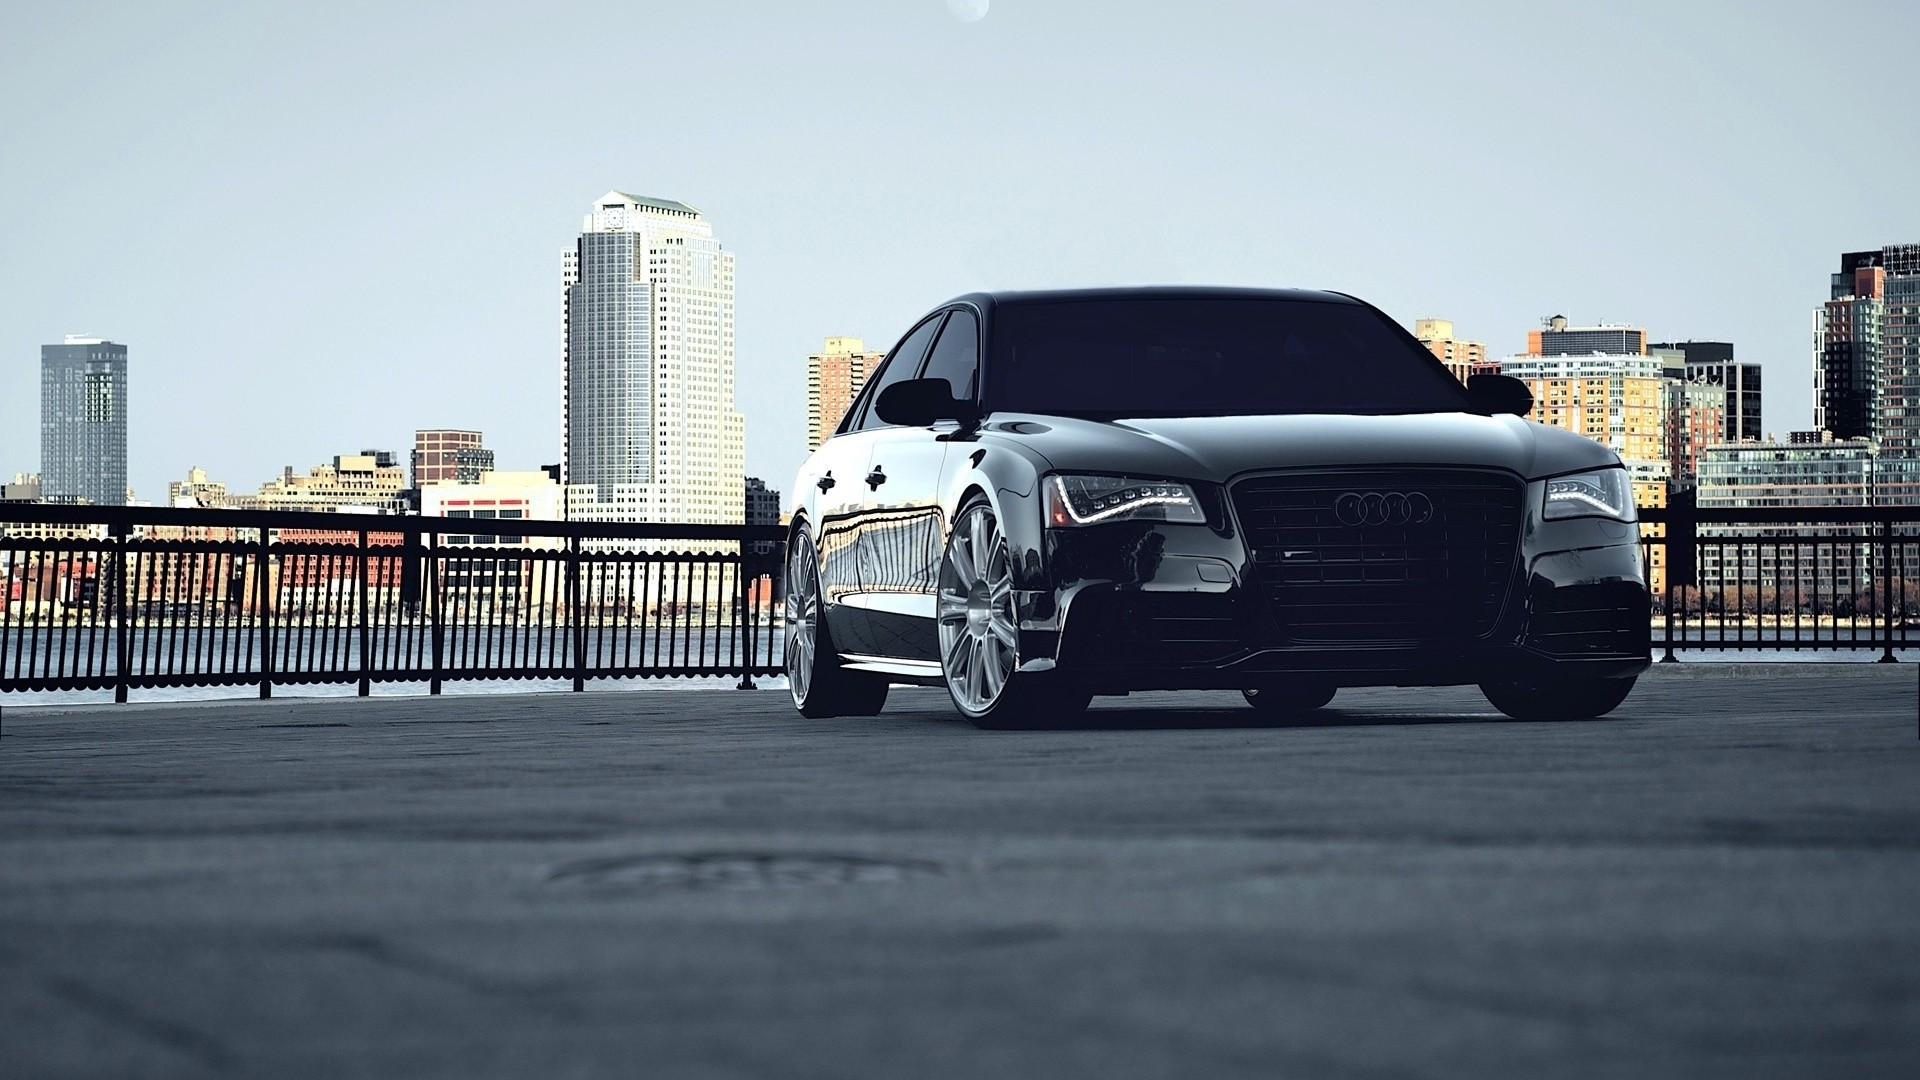 1920x1080 File: Audi A8 Wallpapers HQ Definition.jpg | Diann Daily | 